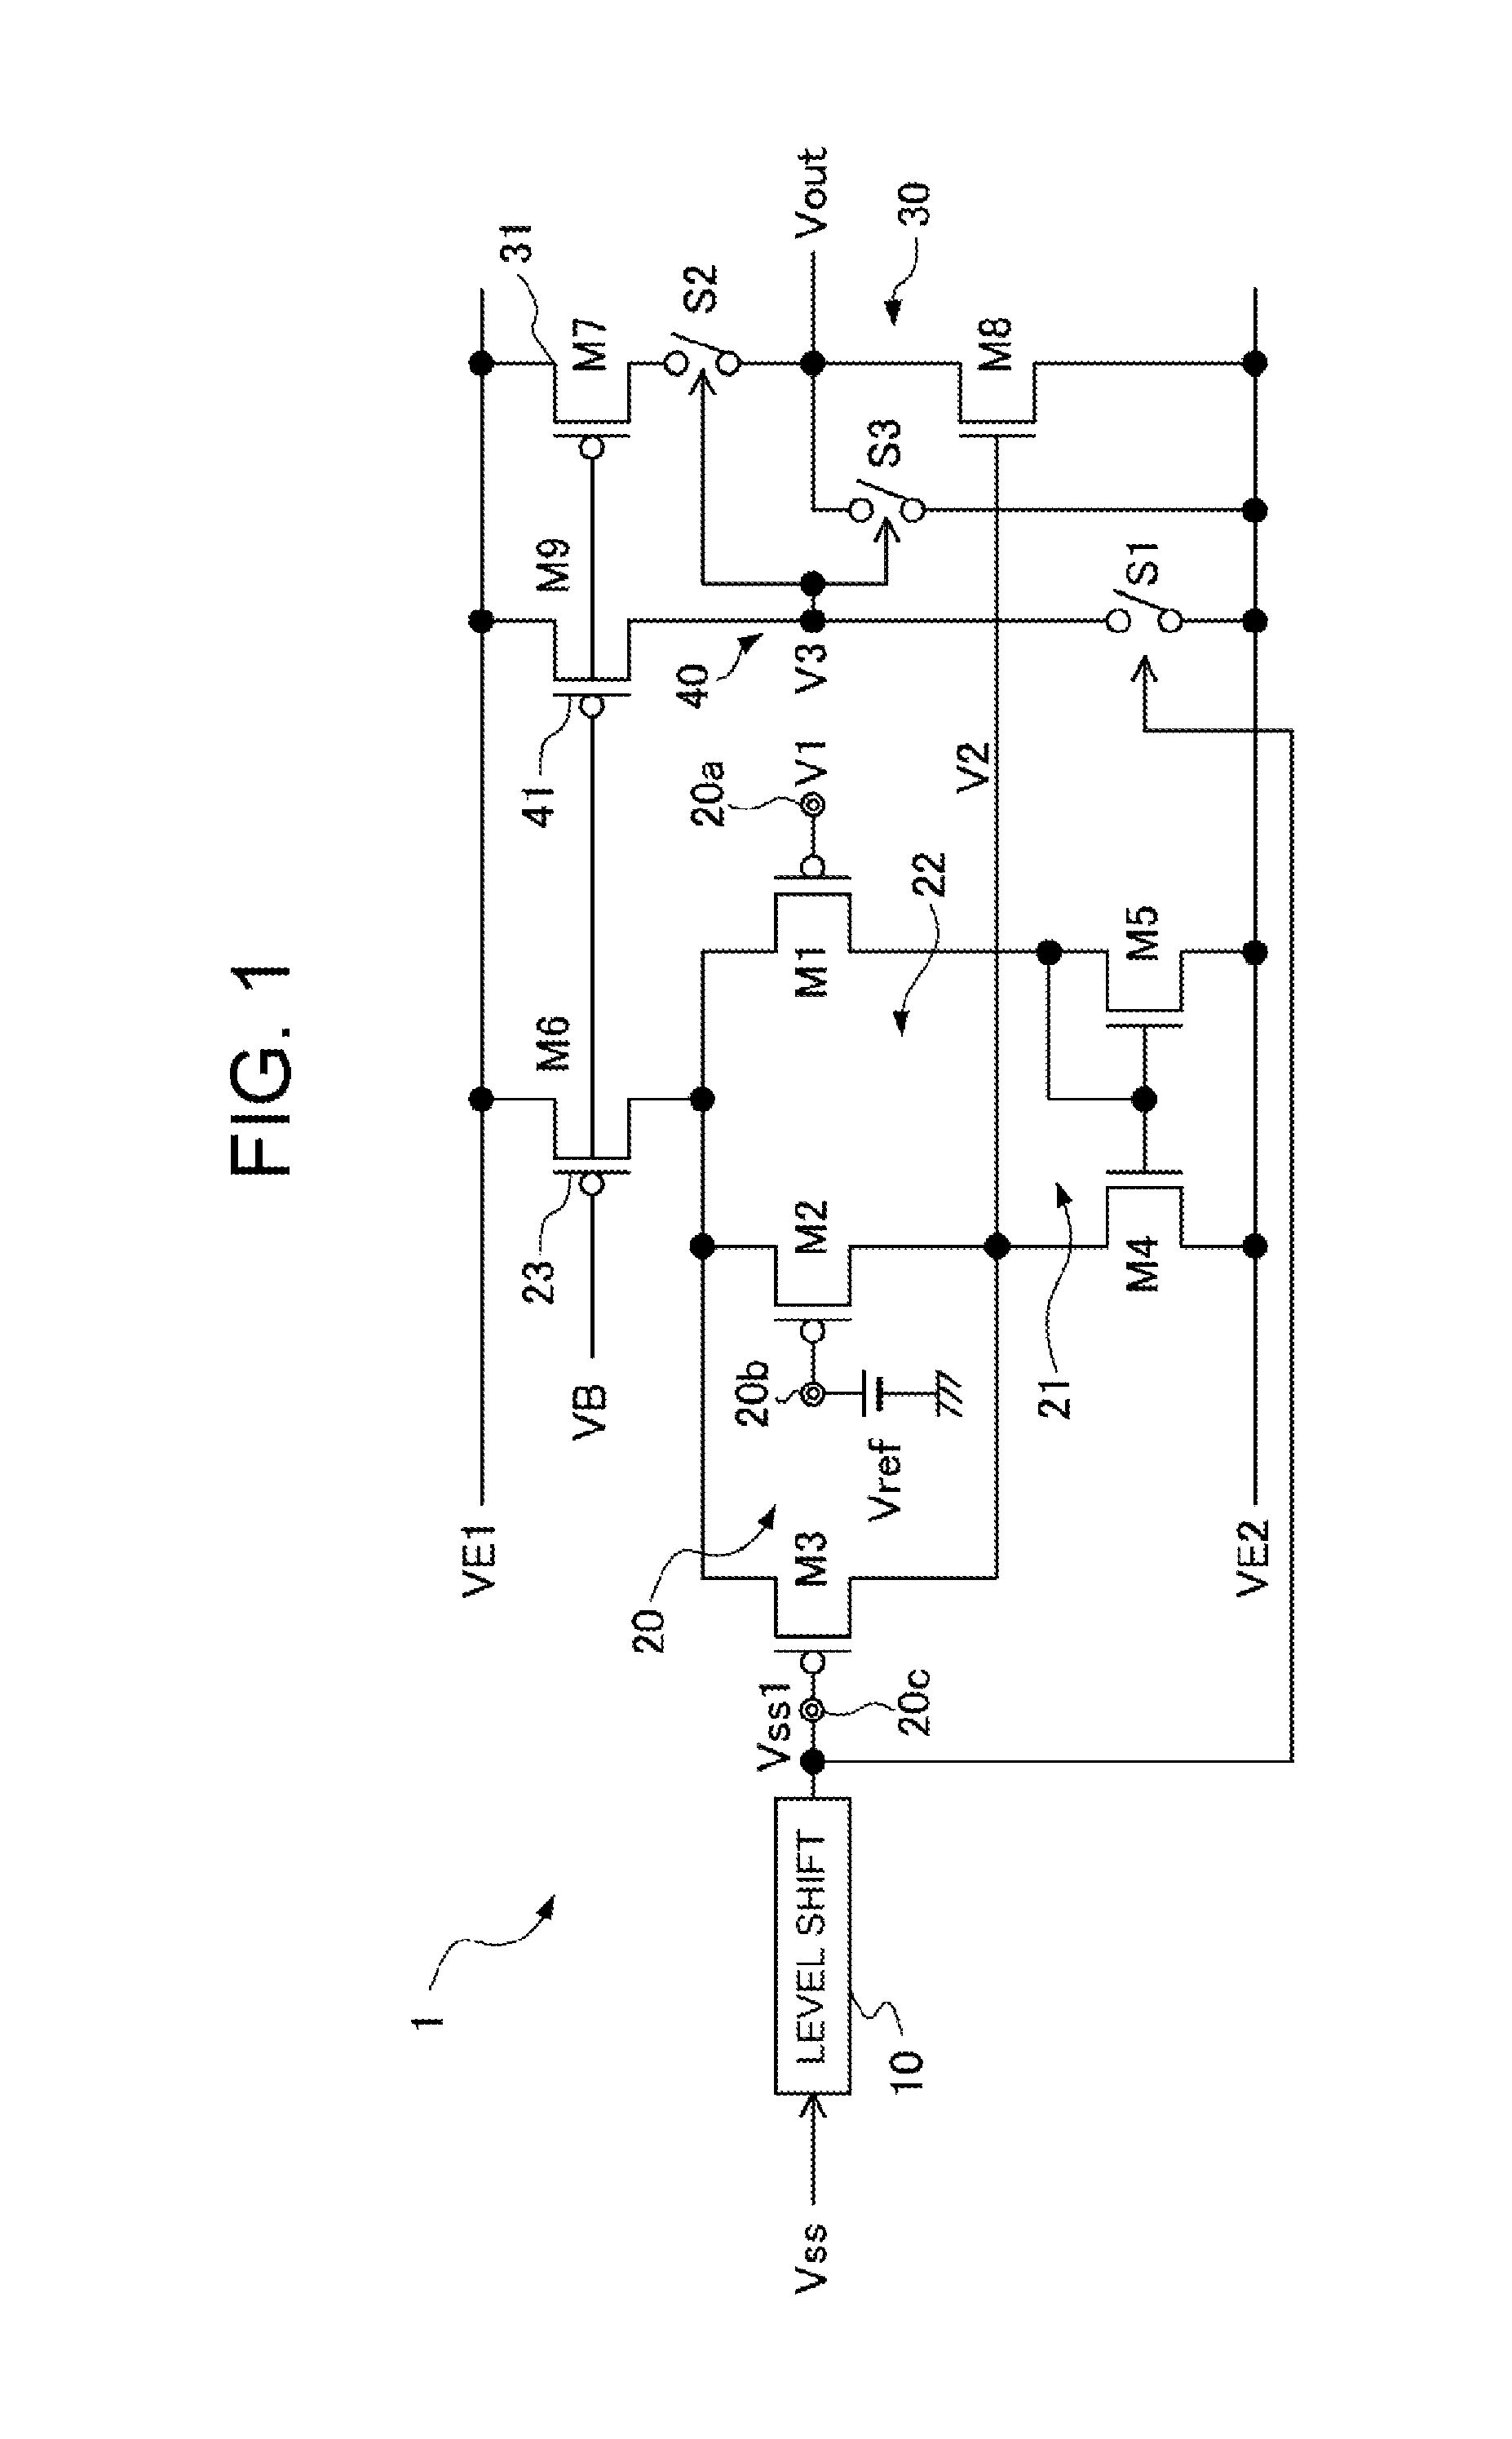 Abnormal voltage detecting device